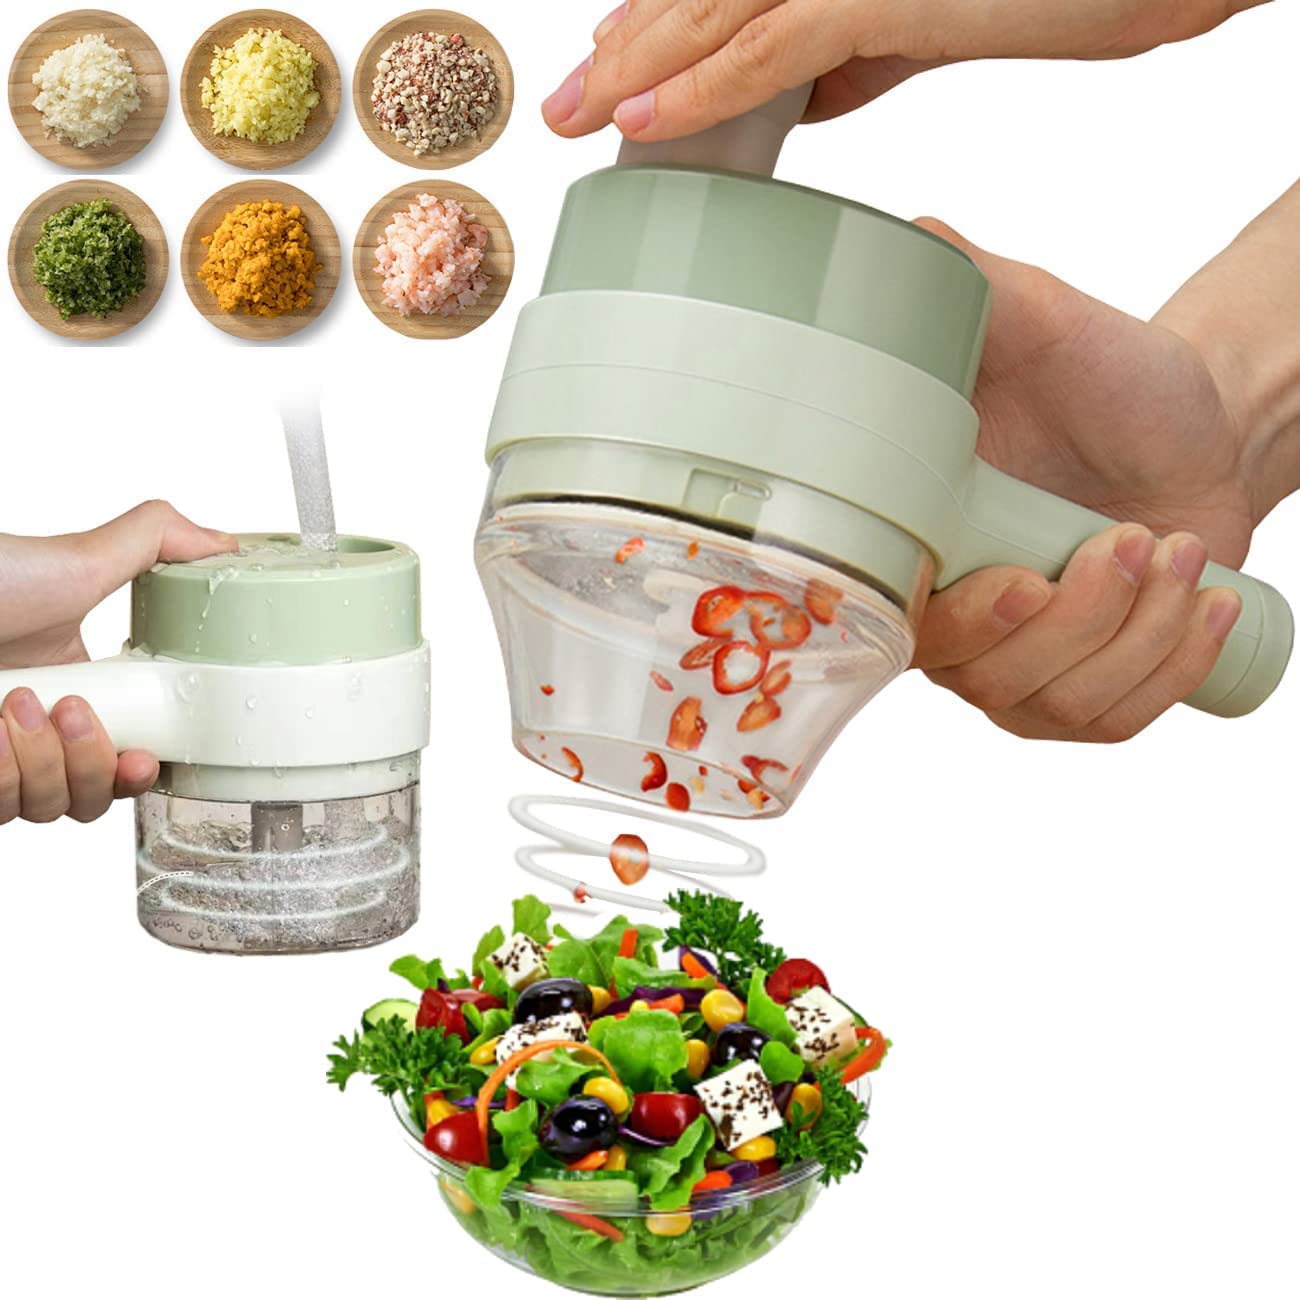 Ayks 4-in-1 Hand Vegetable Cutter Set, Electric Easy Clean for Garlic, Chilli, Onion, Celery, Ginger, Meat, Cordless Food Processor, Garlic Chopper, Press (200ml)